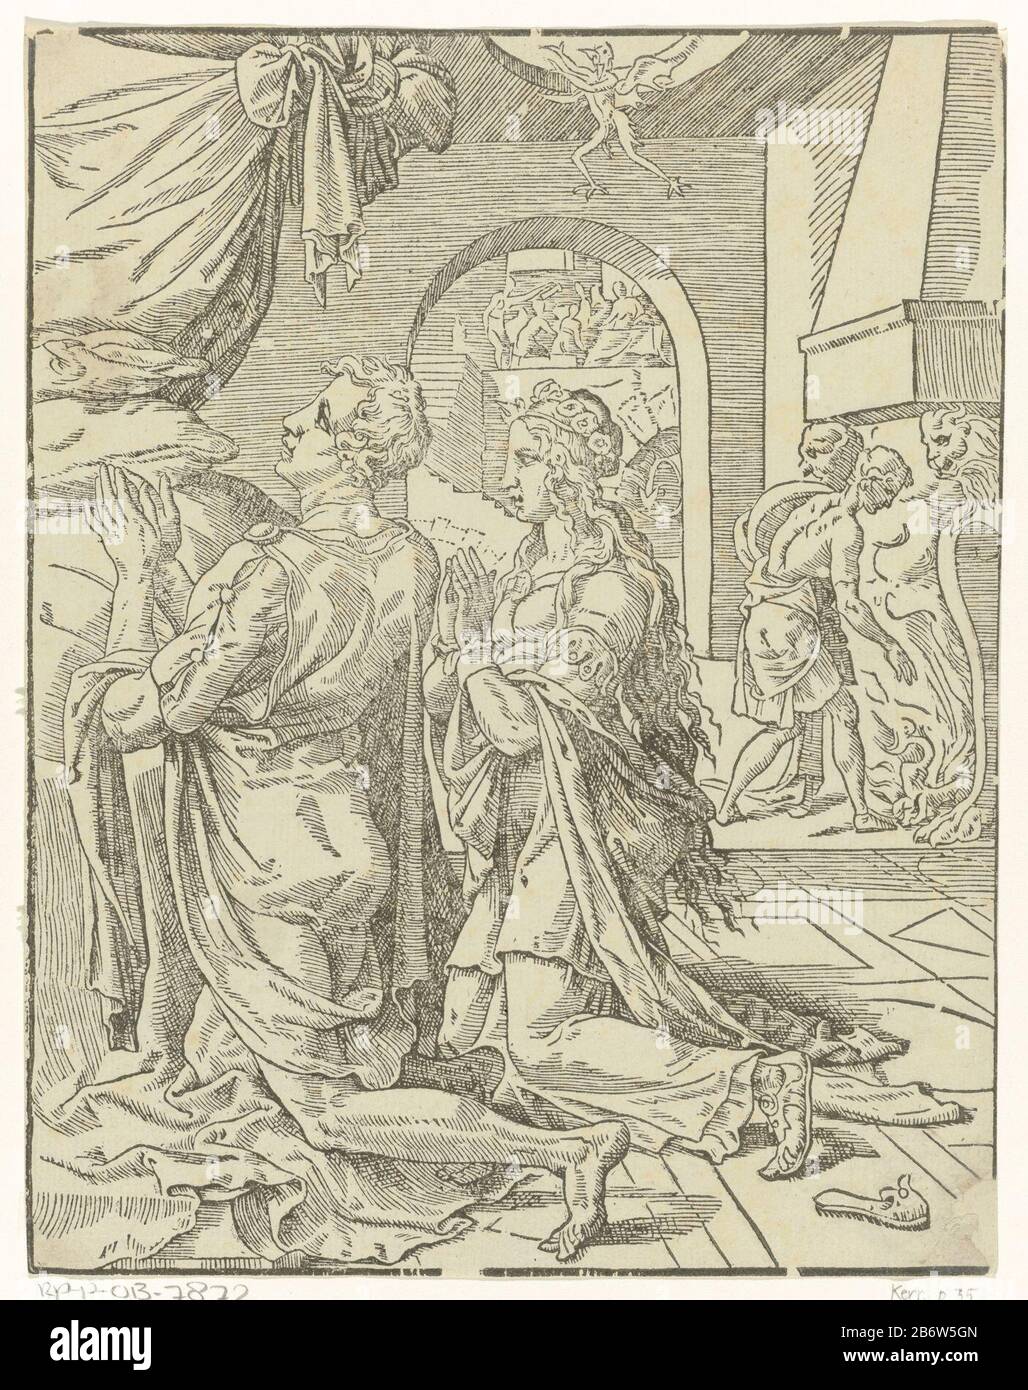 Huwelijksnacht van Tobias en Sara Geschiedenis van Tobias (serietitel) in kneel bedroom Tobias and Sarah in prayer for God's blessing and protection over their marriage request. In the background flight the demon away by the liver and heart of the fish that Tobias on fire legde. Manufacturer : printmaker: Dirck Volckertsz. Coornhert In drawing: Maarten van Heemskerckstraat Place manufacture: The Netherlands Date: ca. 1548 Physical characteristics: wood block material: paper Technique: wood block dimensions: sheet: h 240 mm × W 187 mm Subject: Tobias and Sarah praying Stock Photo